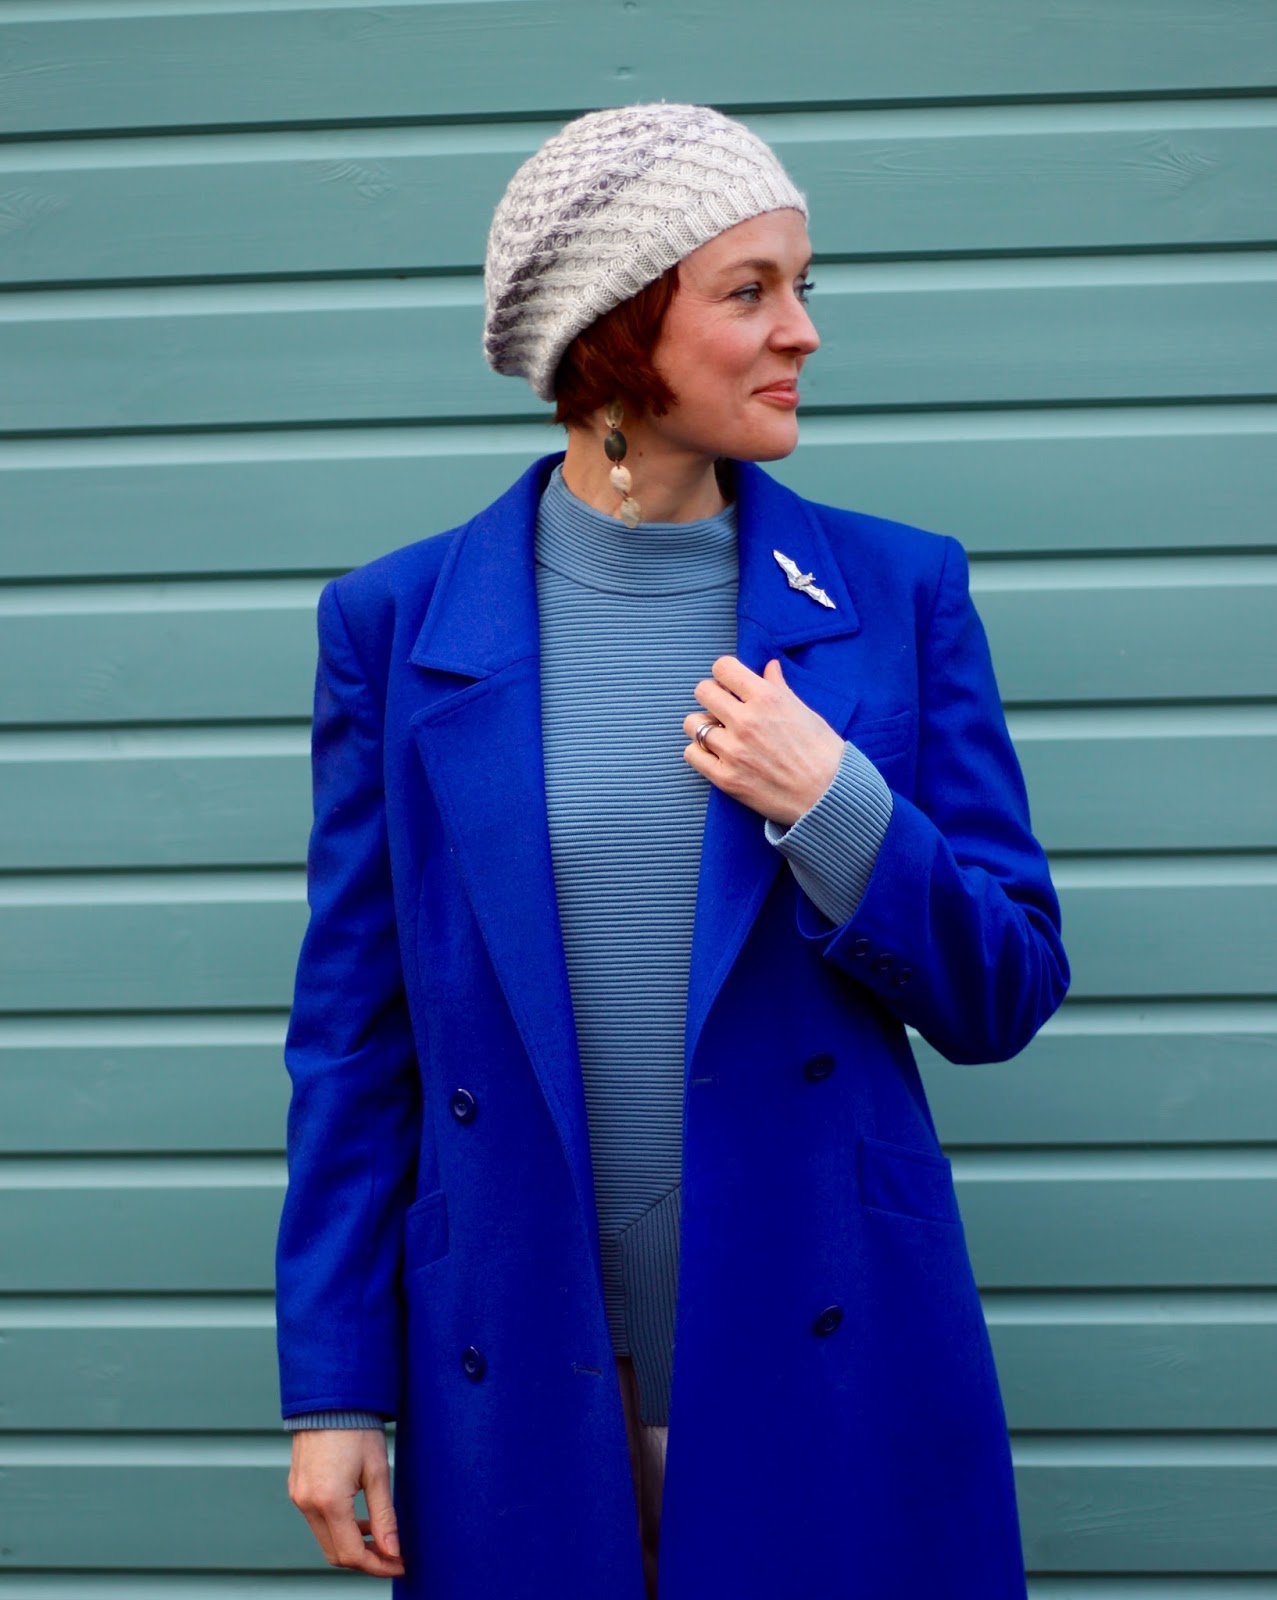 Wearing Blue & Silver in Winter | Maxi Skirt and Cobalt Coat